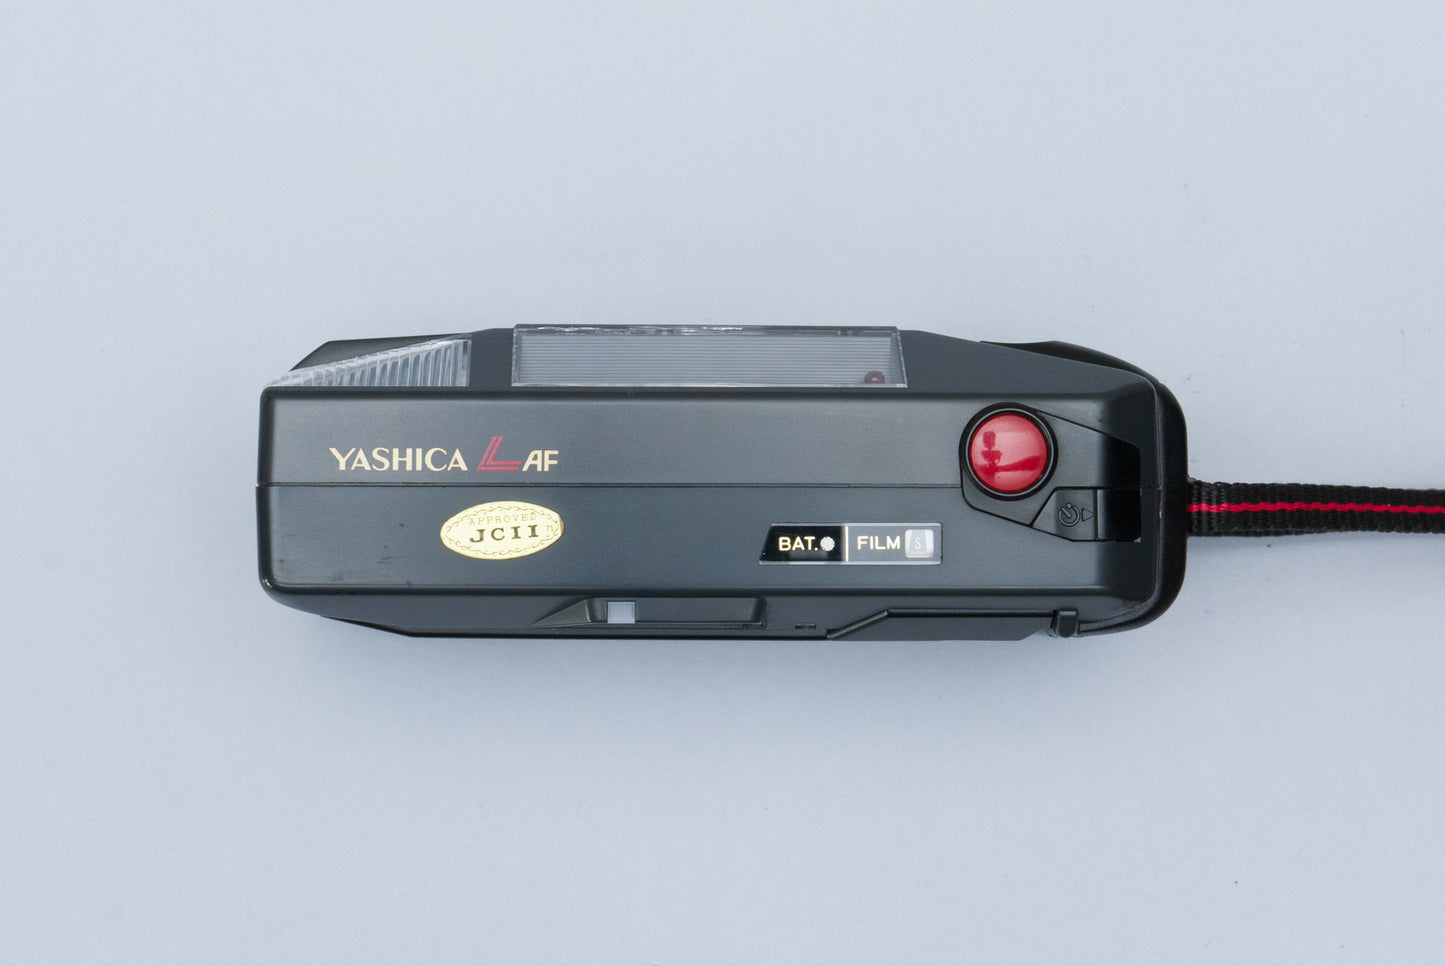 Yashica L AF Compact 35mm Point and Shoot Film Camera